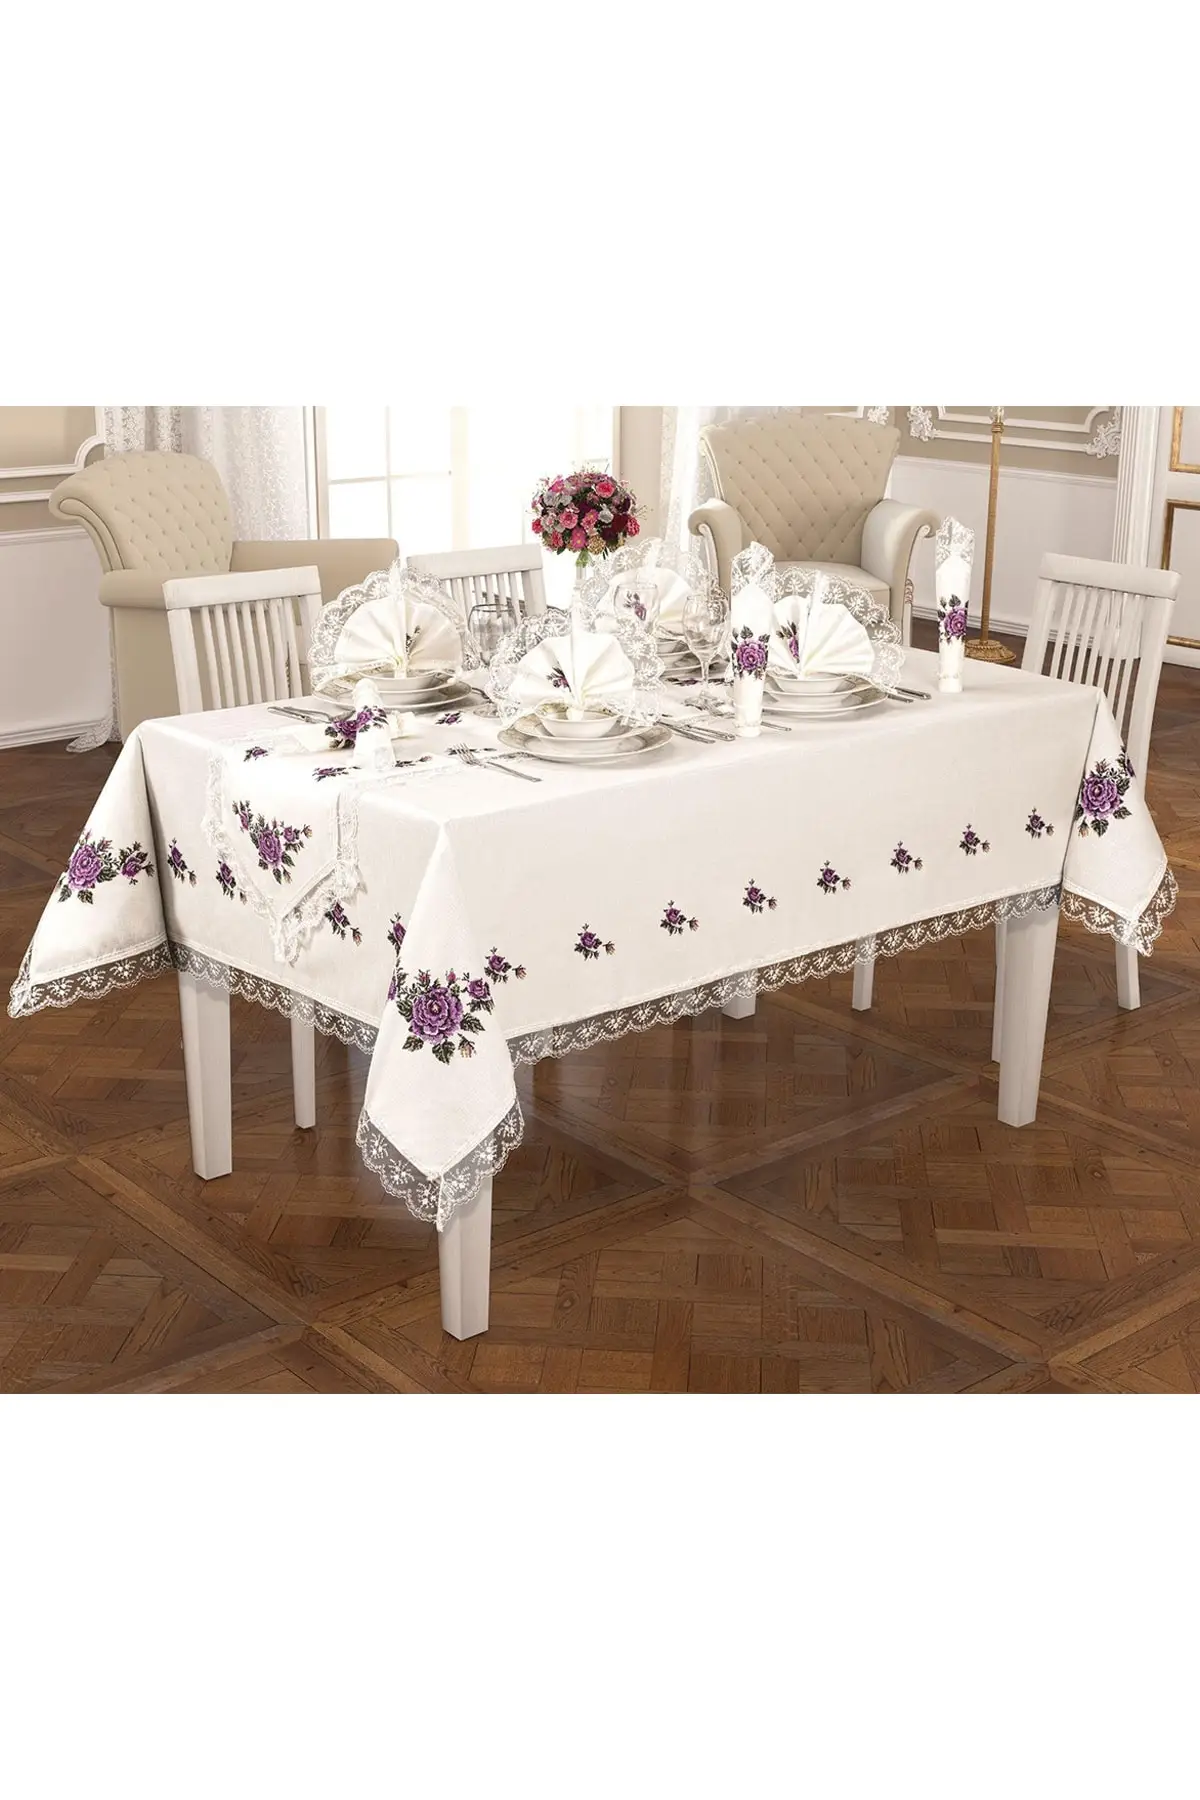 

Cross Stitch Printed Laced Tablecloth Set 18 Pieces Lilac - Rectangular Dining Table Cloth/Cover Quality - Runner Napkins Rings